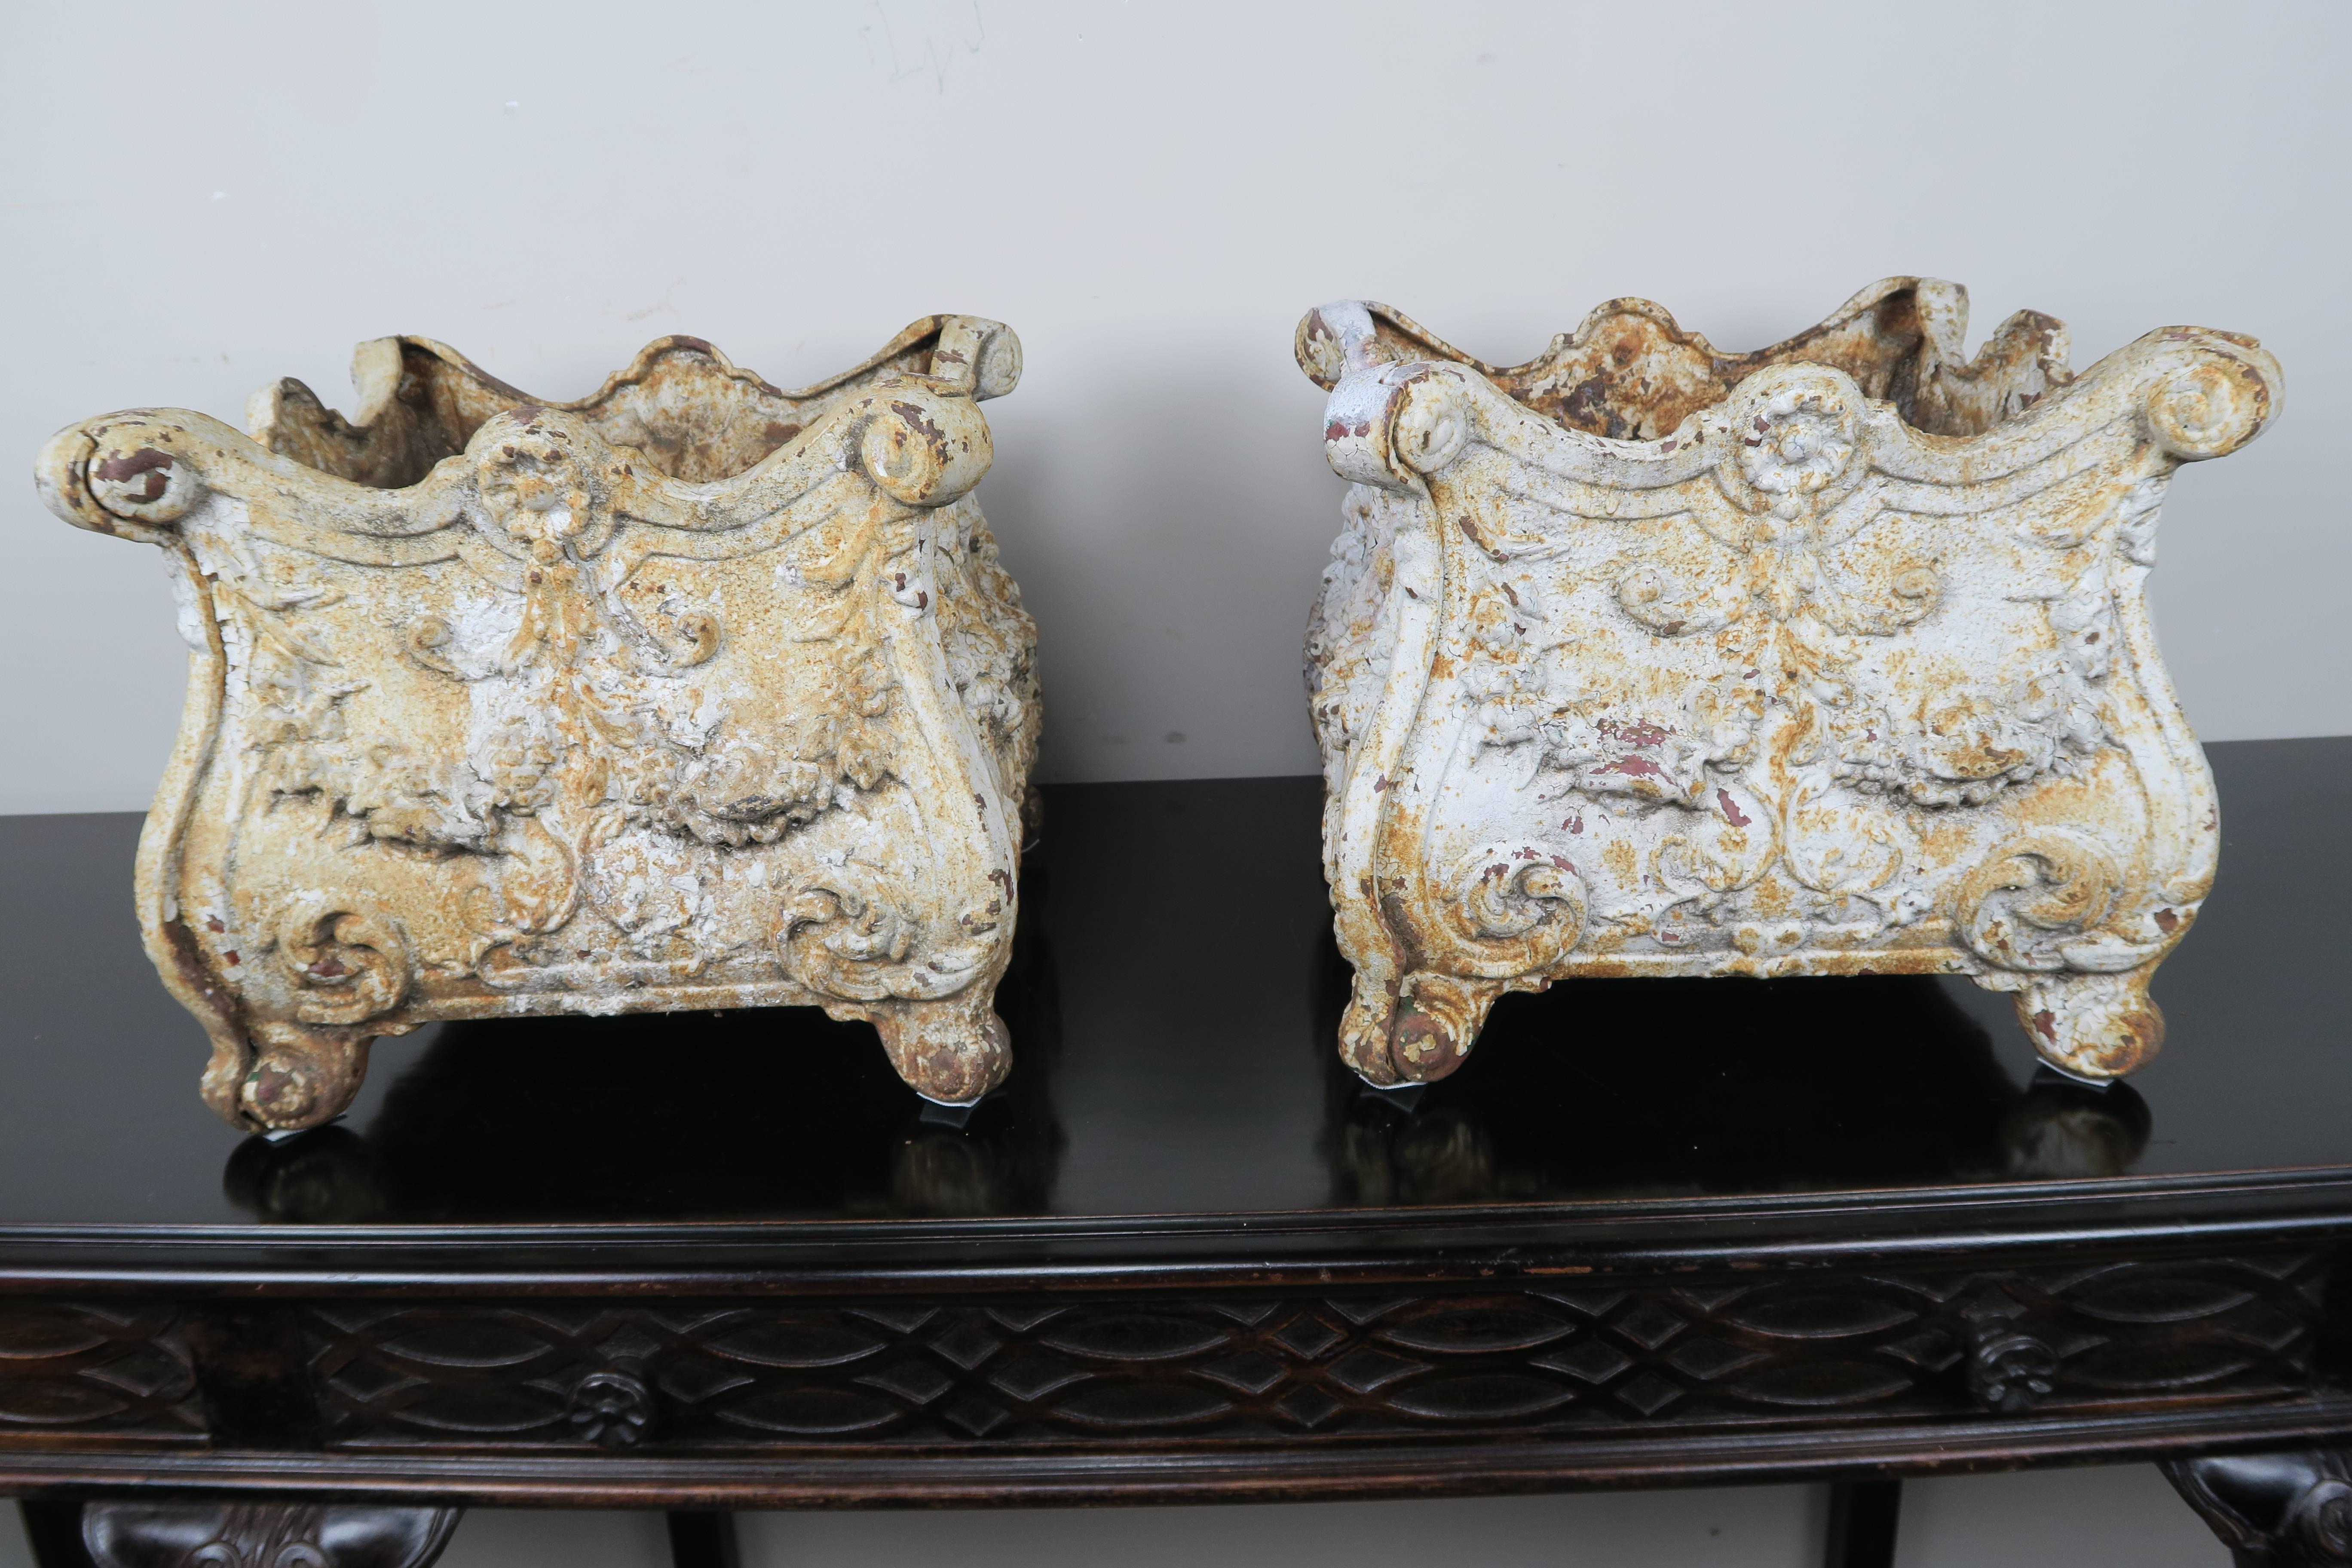 A pair of 19th century French painted cast iron square shaped planters. The planters have beautiful details depicting garlands of flowers. Wonderful worn/weathered finish.